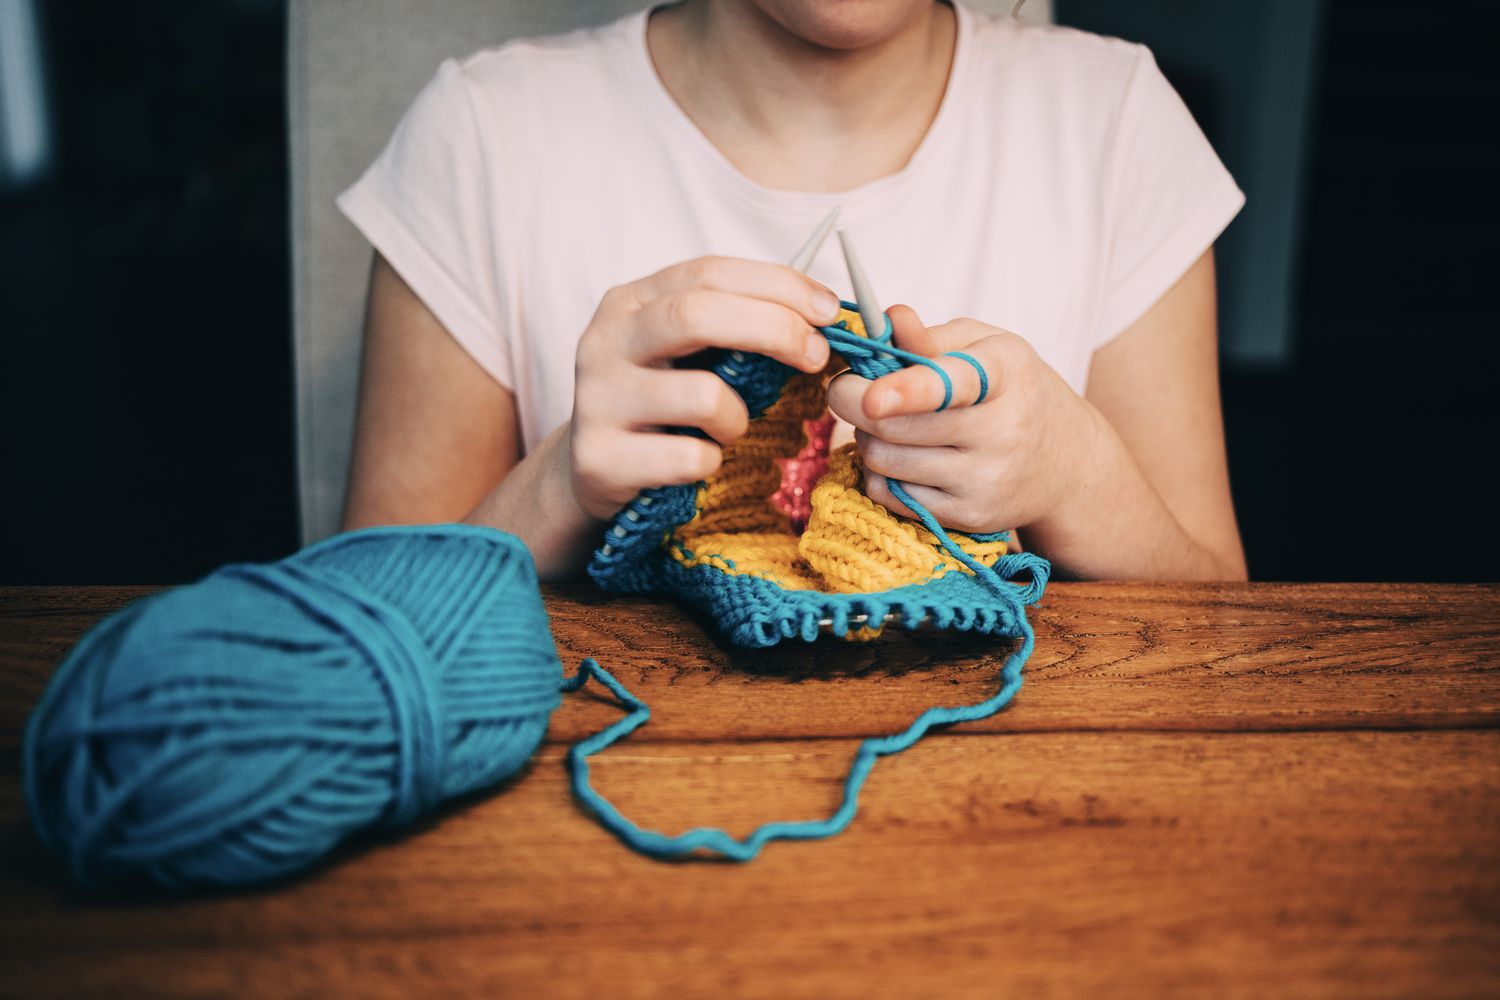 5 Creative Hobbies That Will Help You Unwind and Relax